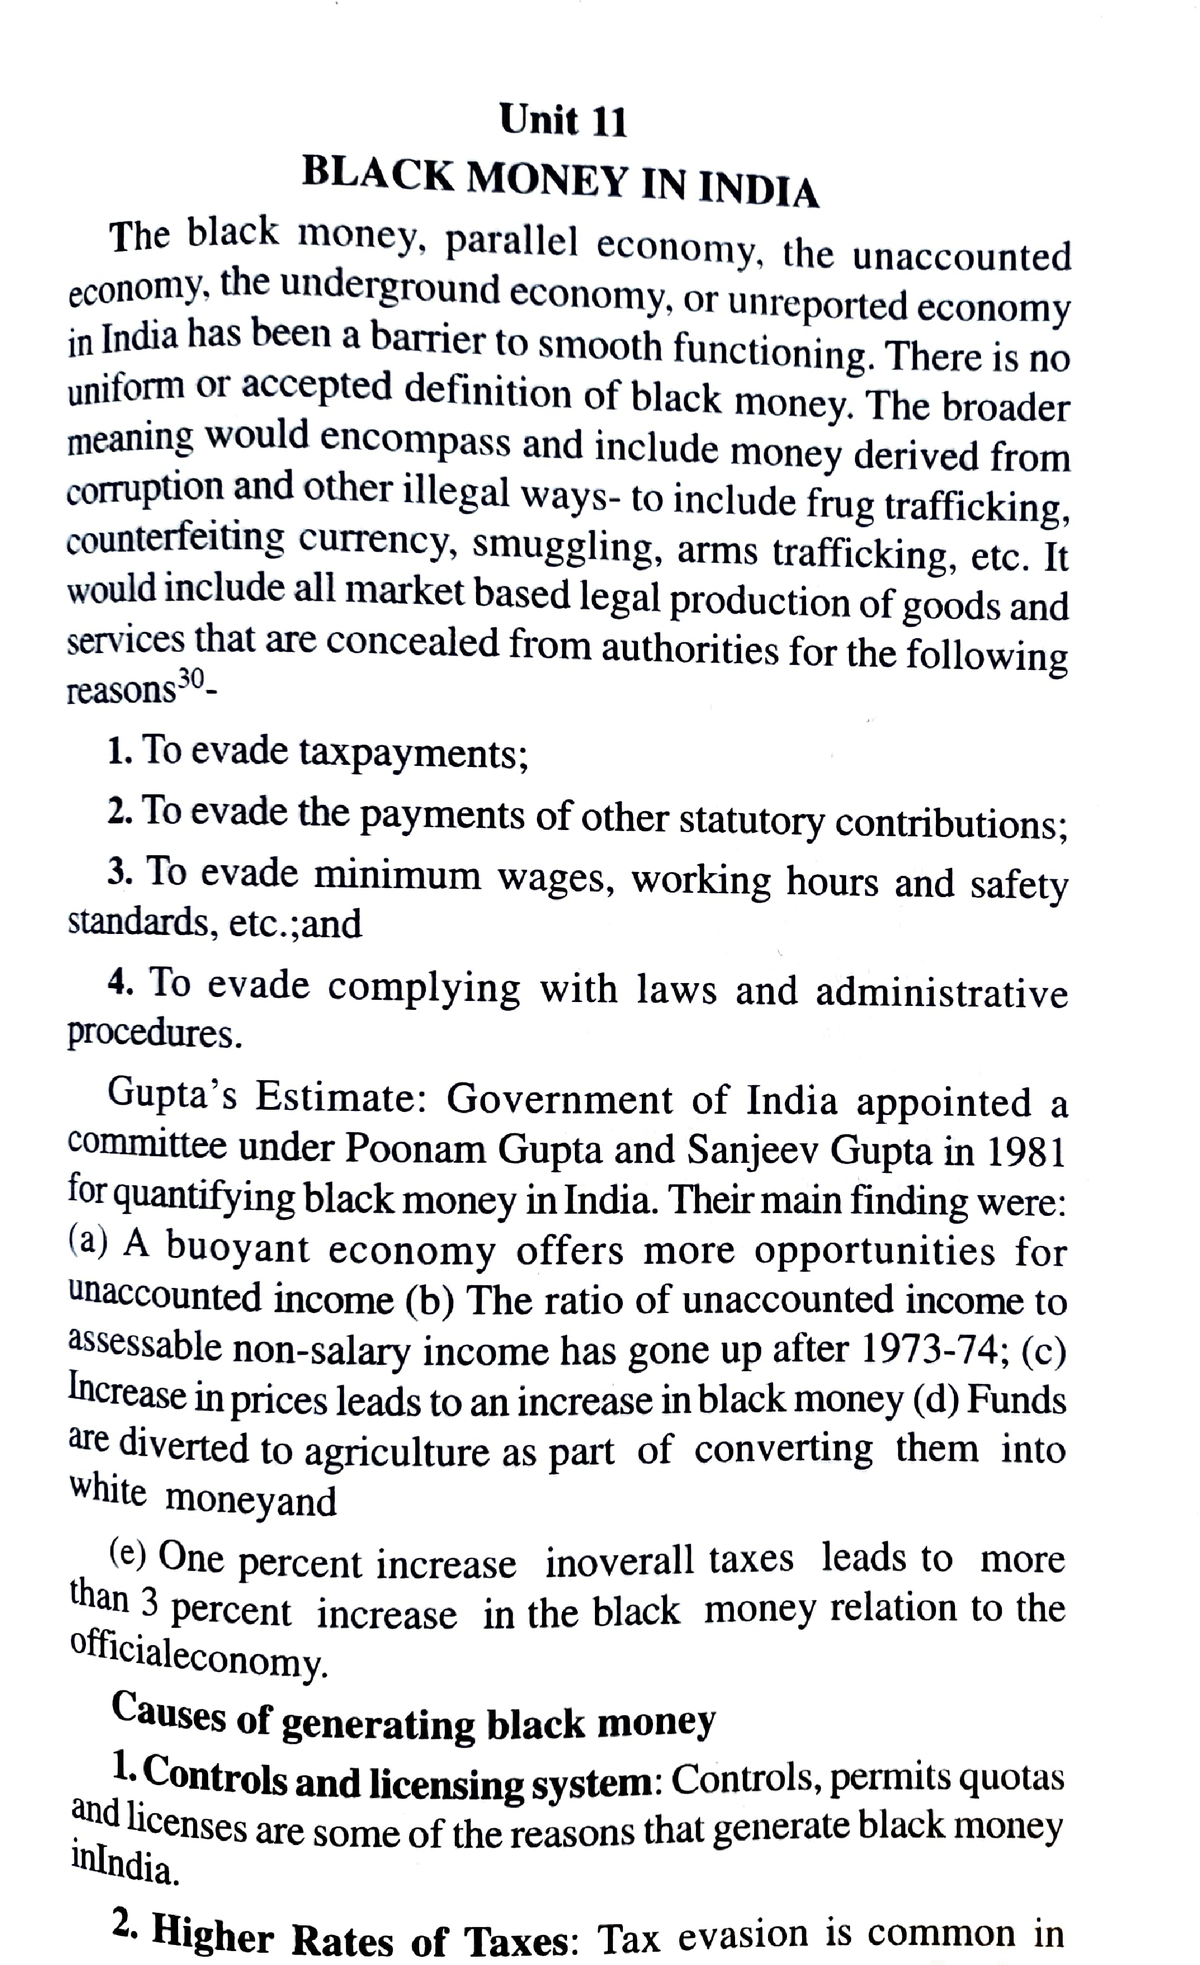 essay on black money and indian economy for mba students